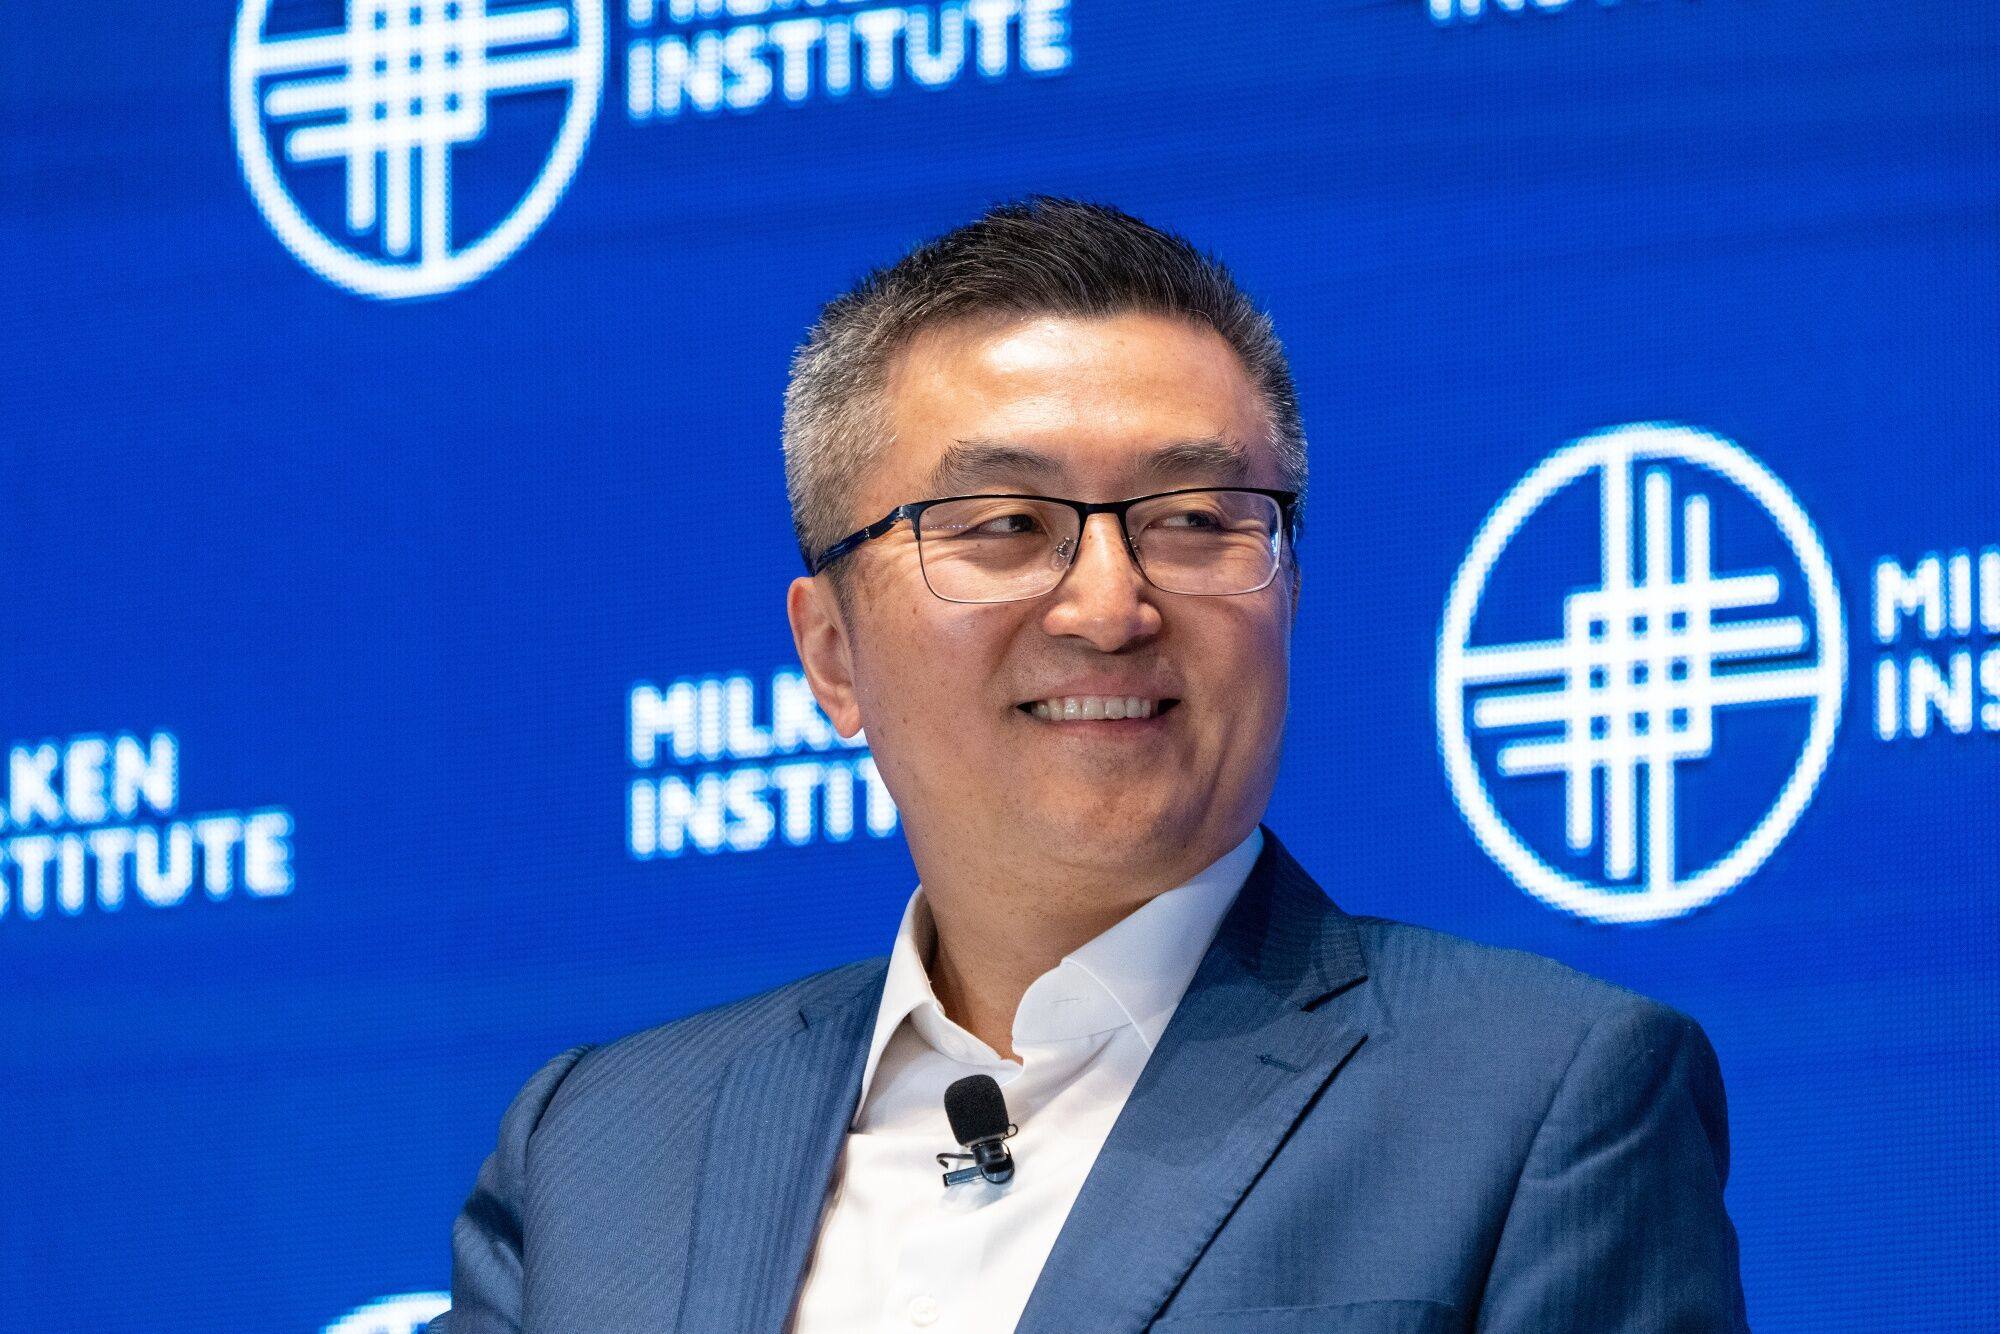 Xpeng’s Brian Gu at the Milken Institute’s Global Investors’ Symposium in Hong Kong on Tuesday. Photo: Bloomberg